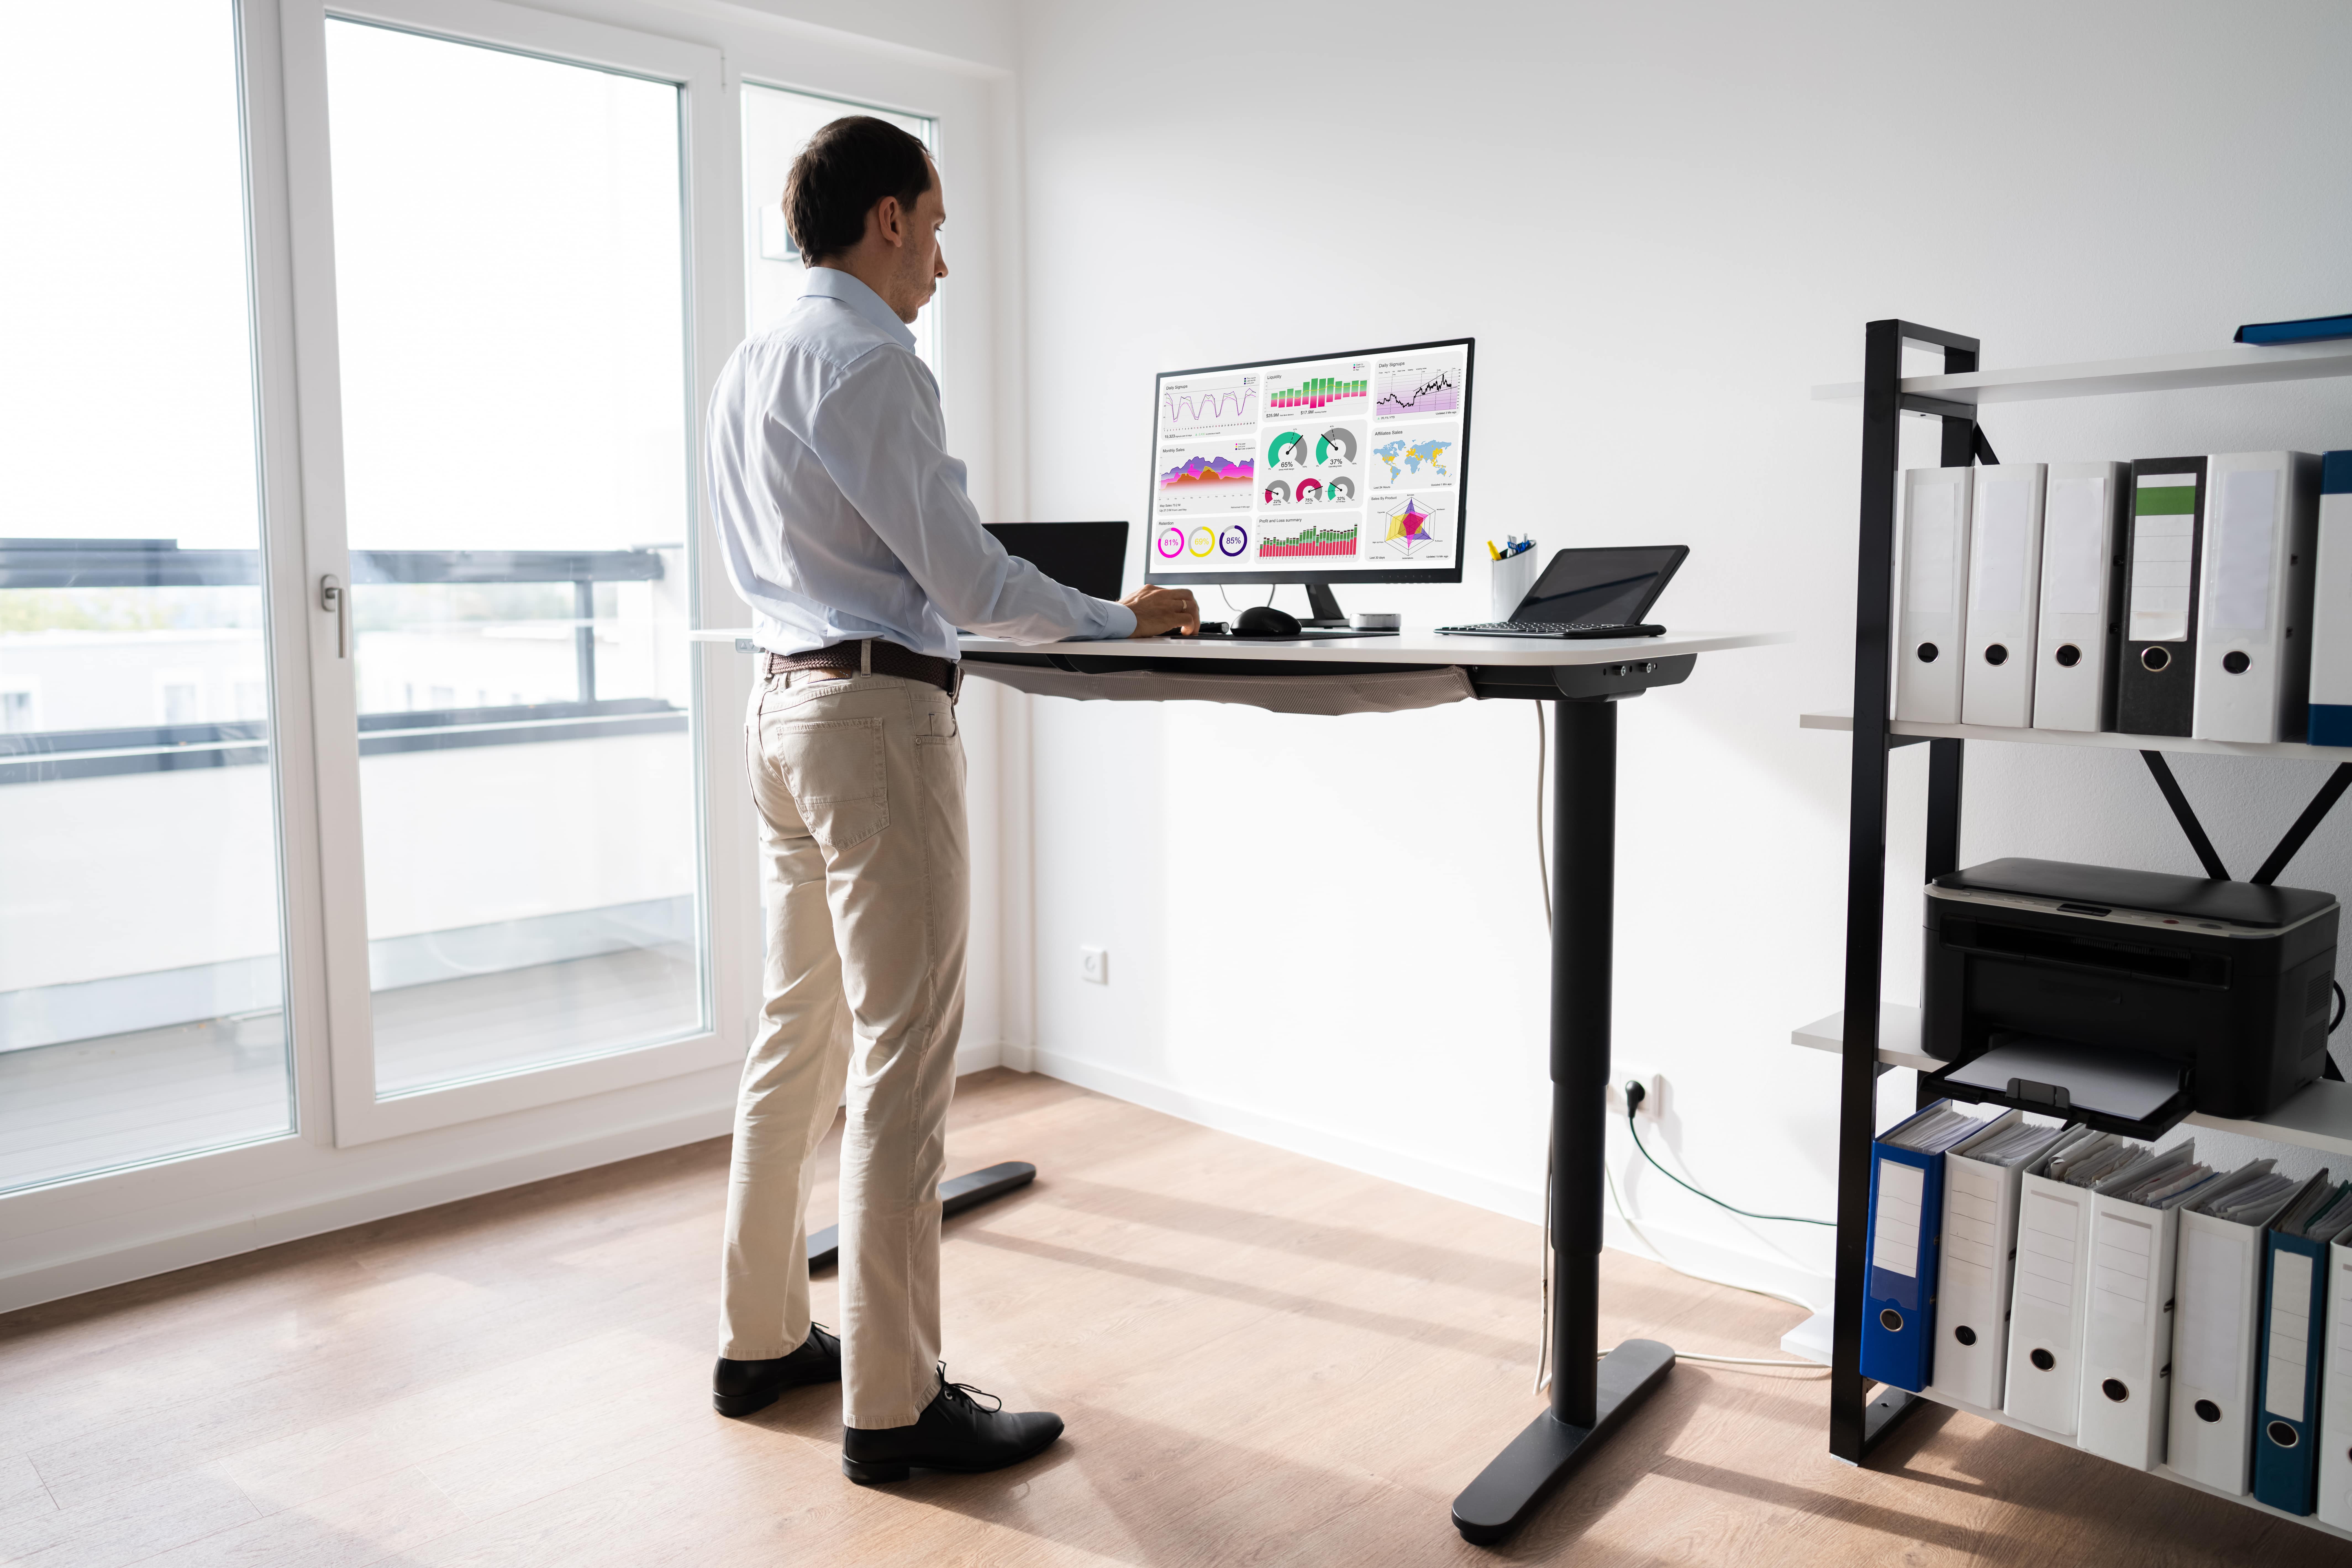 Take a look at the best standing desks of 2022. The future is here, and these are some of the most innovative designs for your workspace.